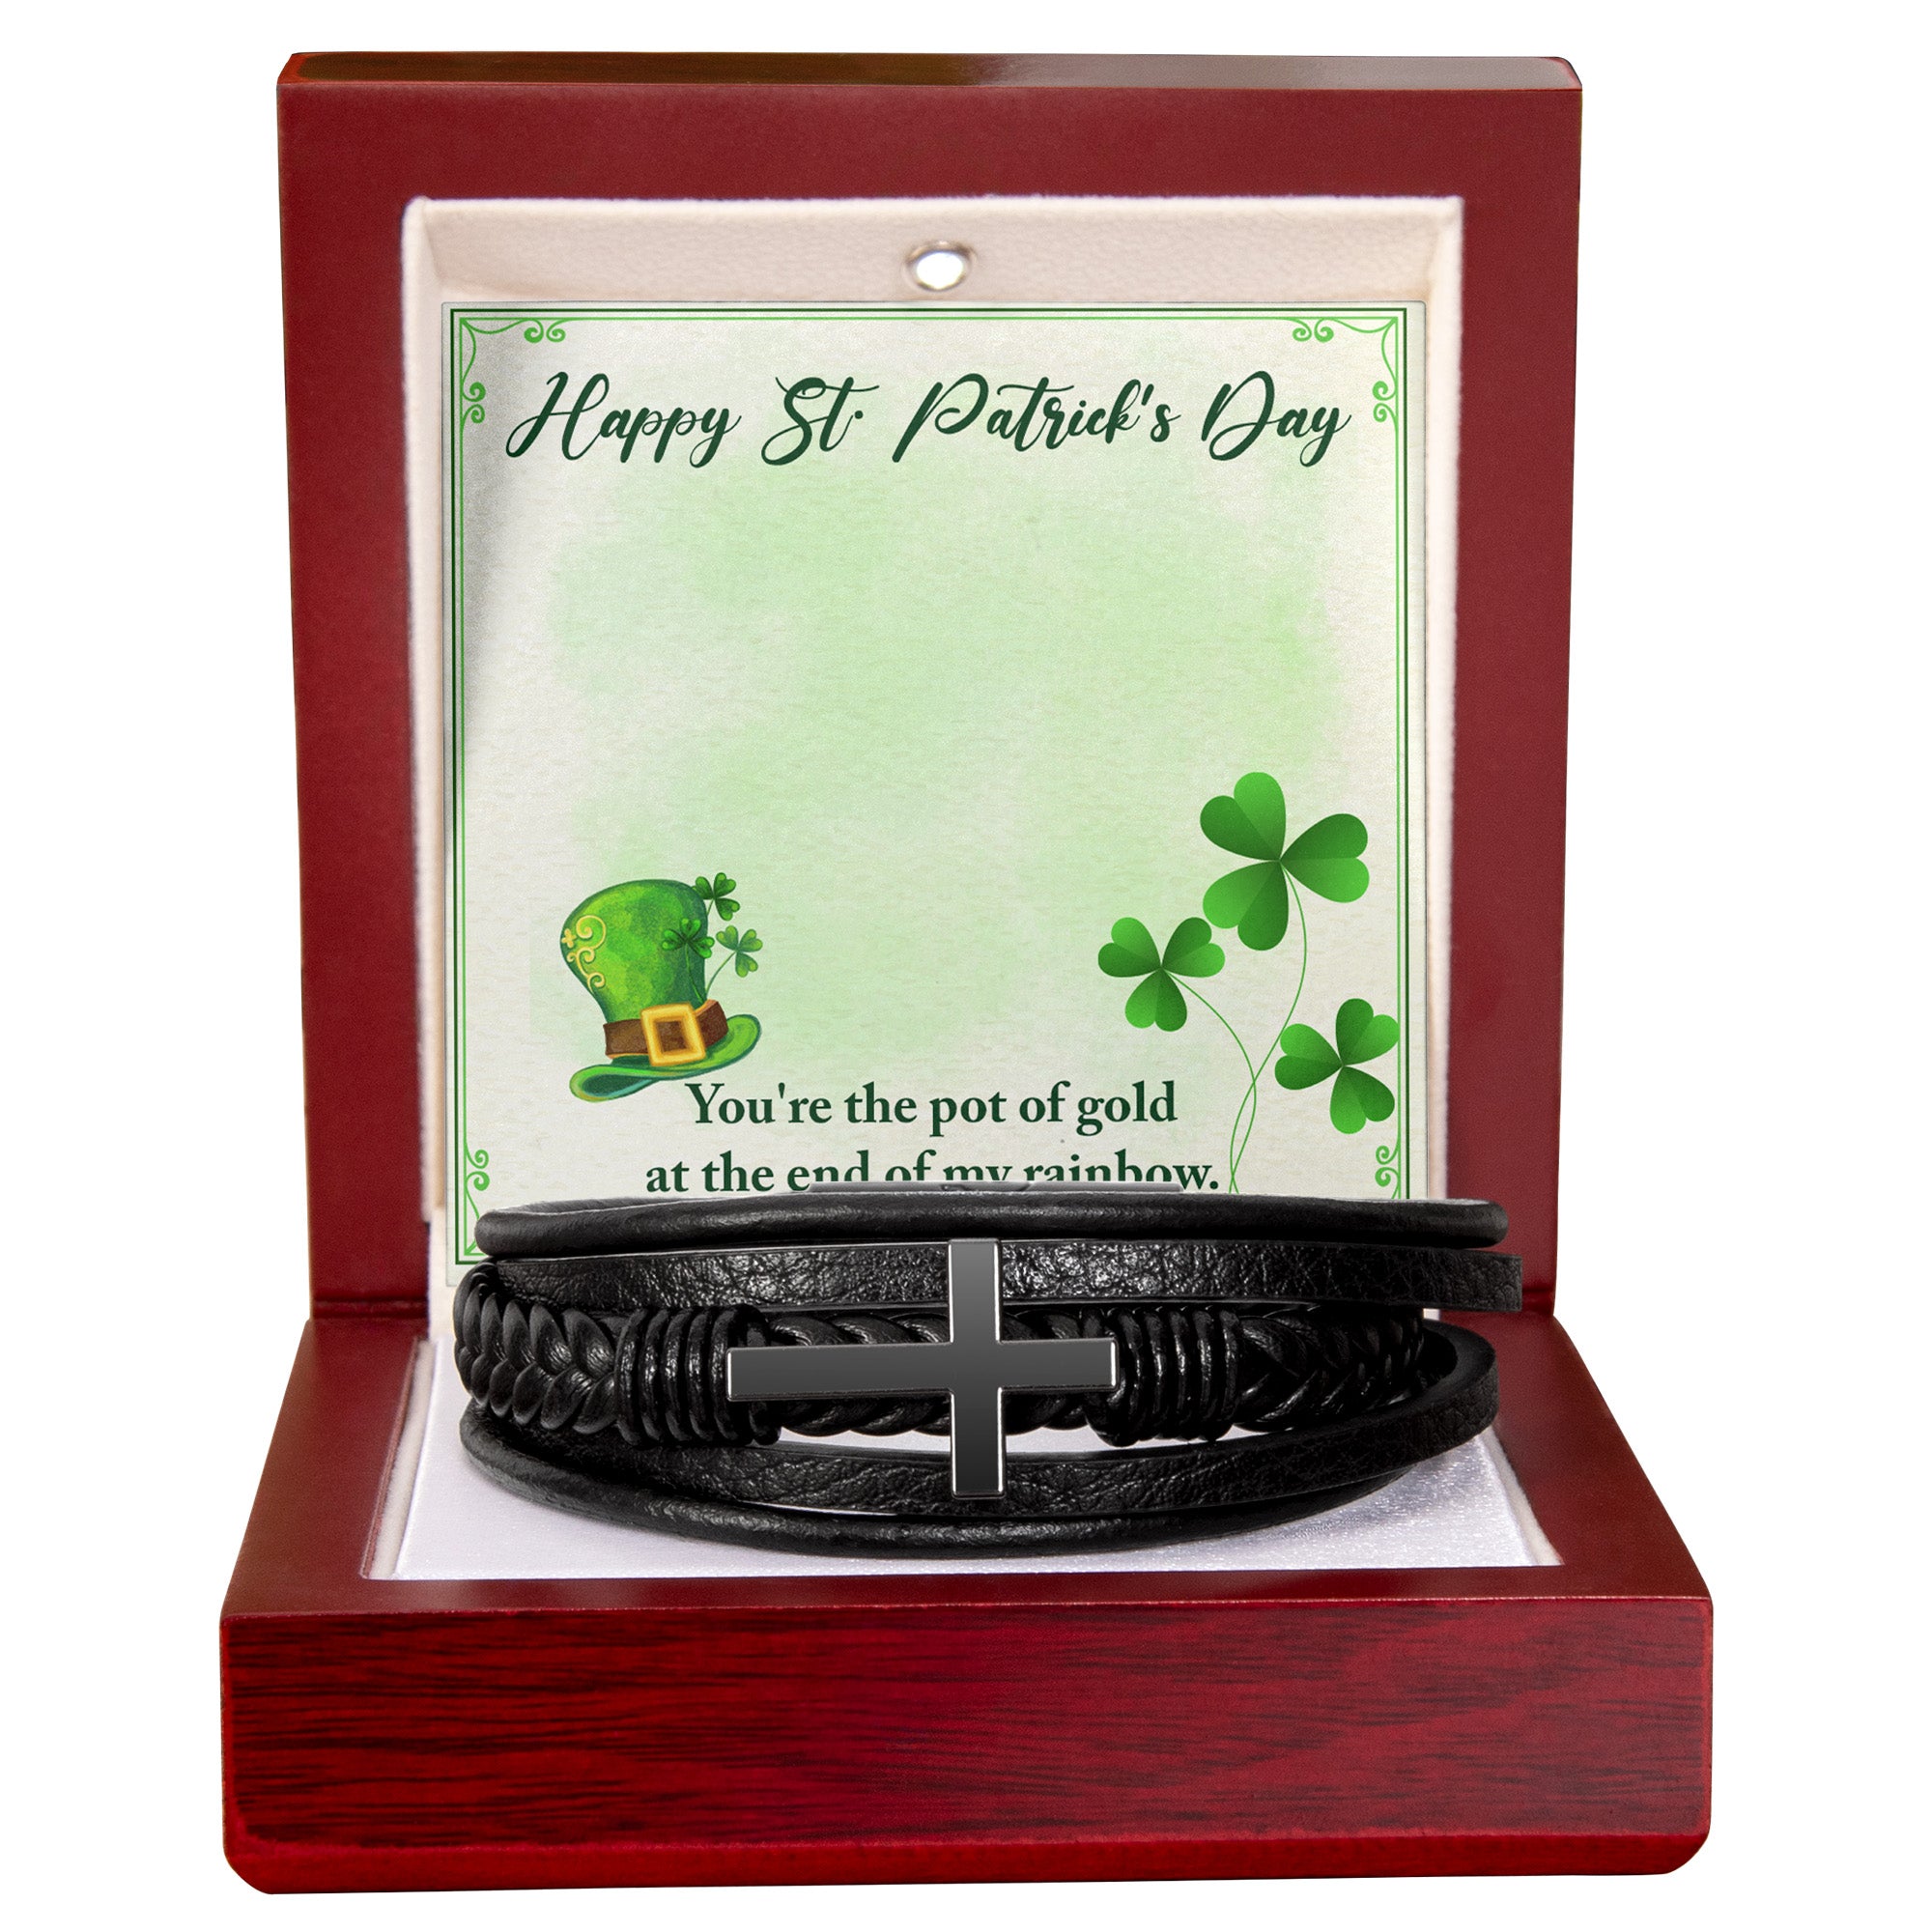 You're The Pot of Gold - Saint Patrick's Day Gift - Men's Cross and Black Braided Rope Bracelet Jesus Passion Apparel